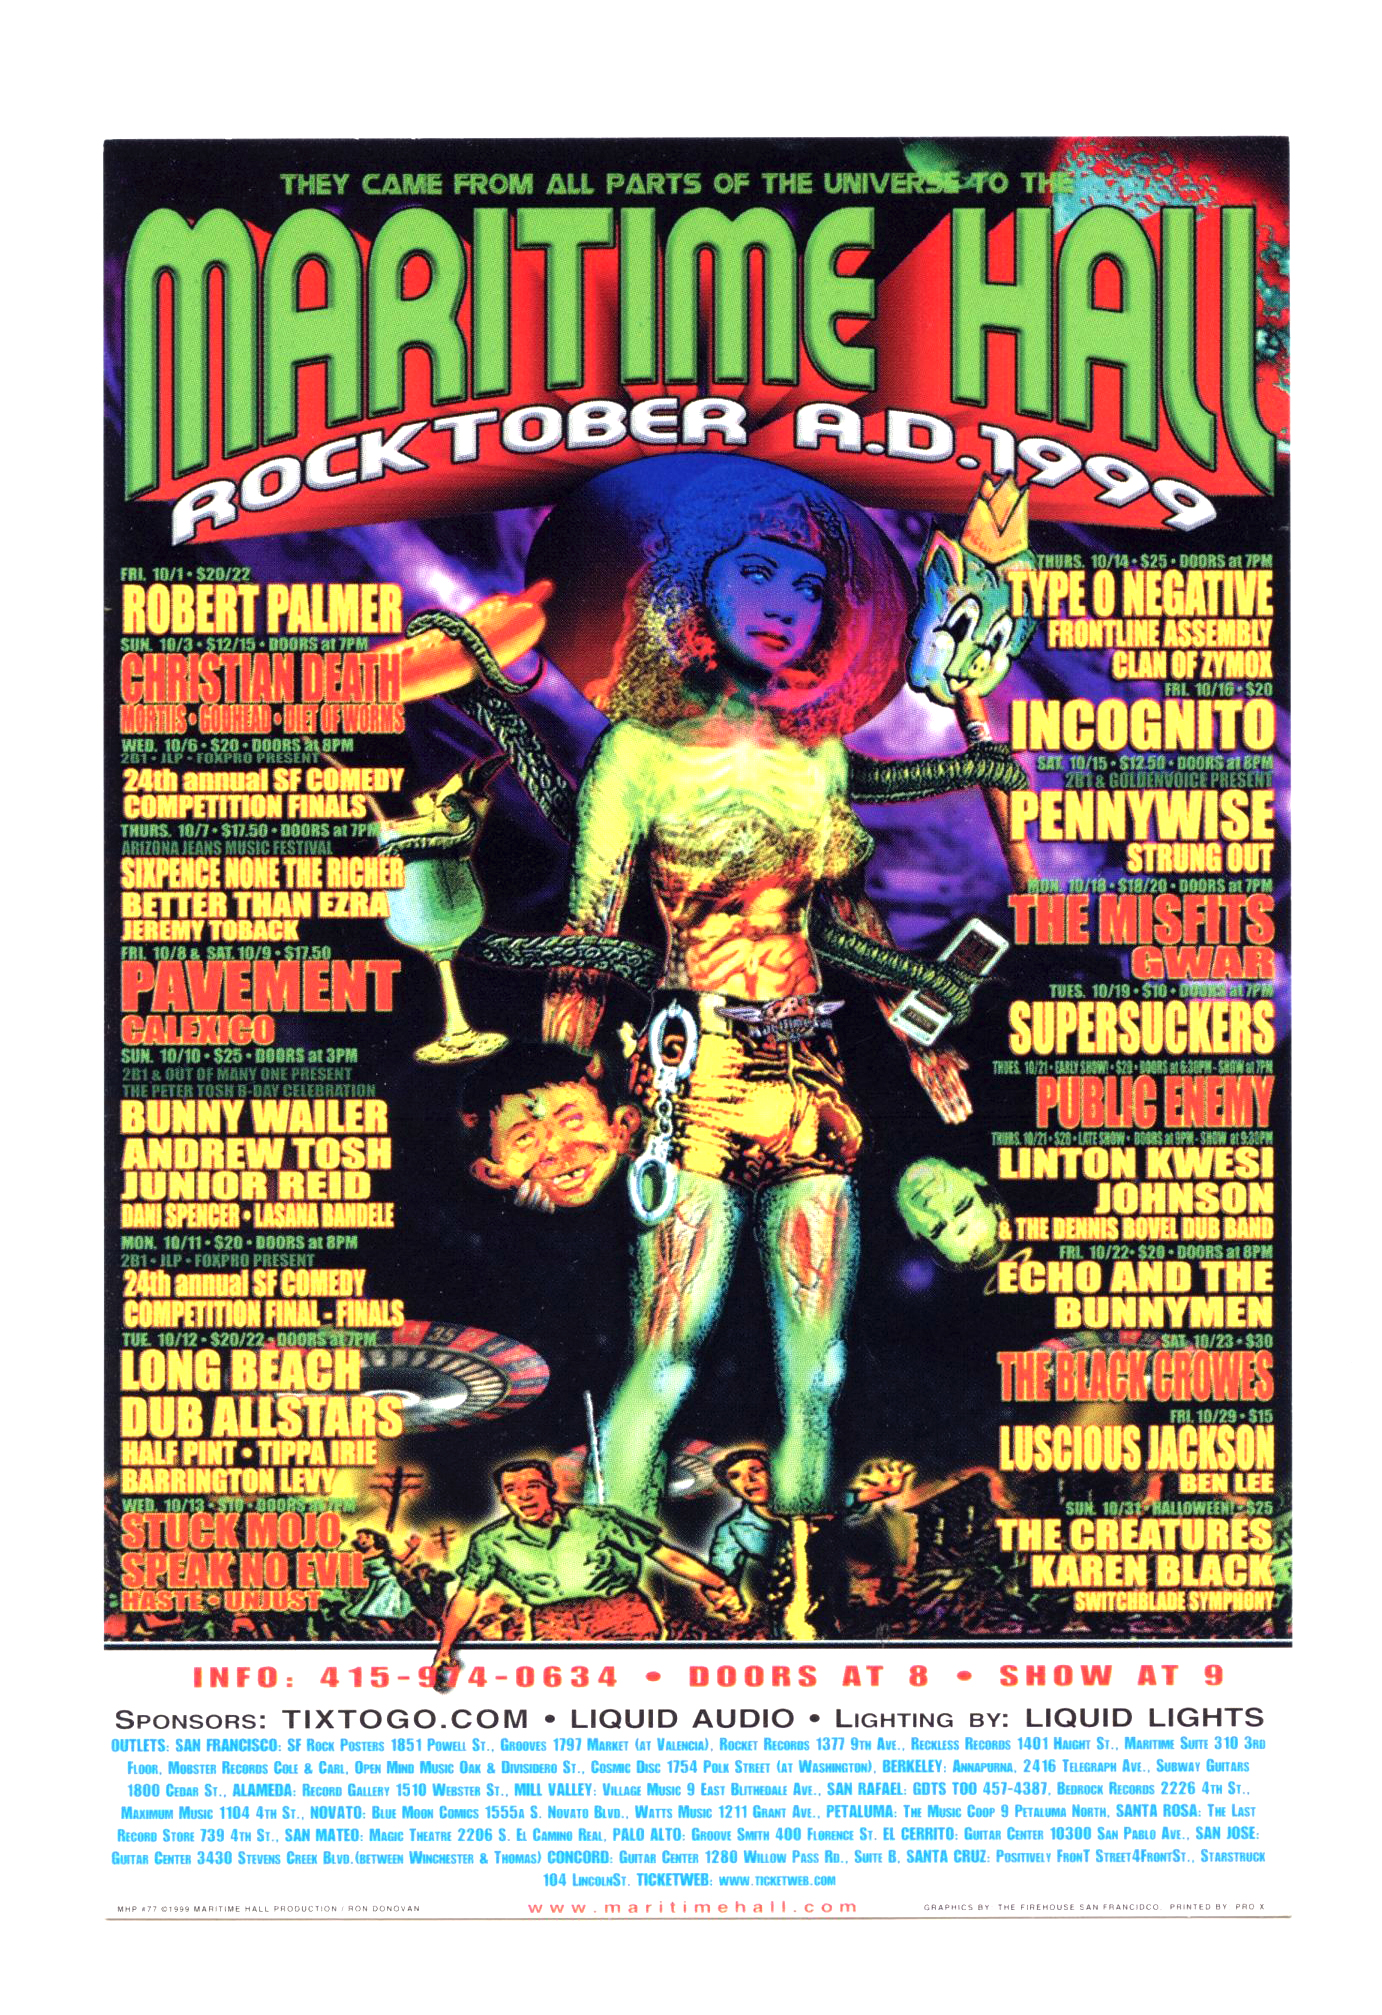 Maritime Hall 1999 Oct Handbill The Black Crowes Crowes Type O Negative